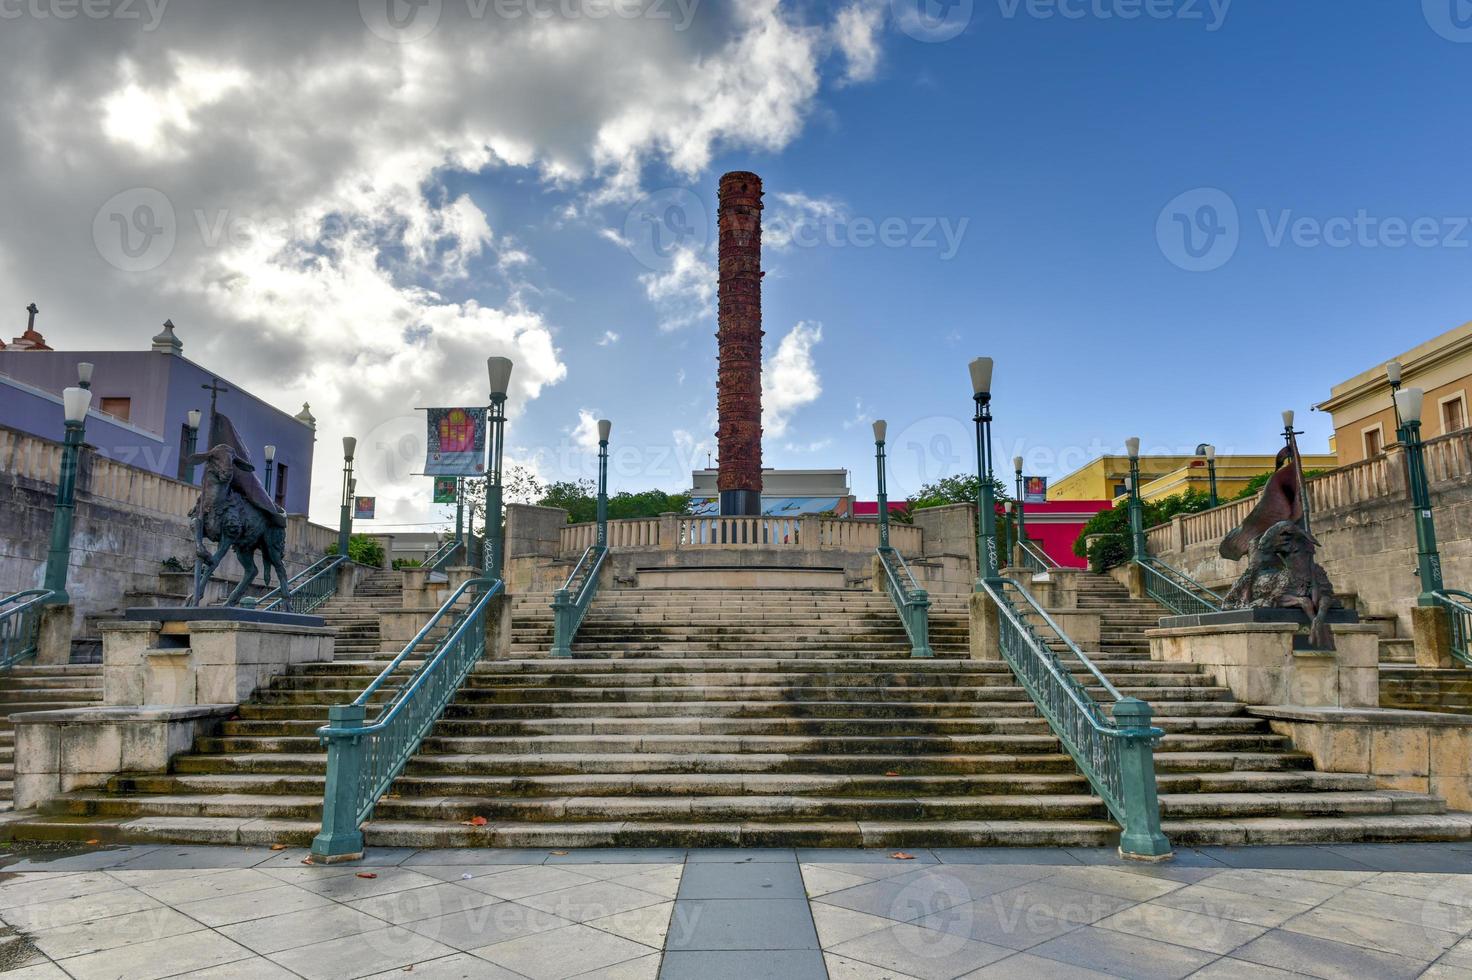 Plaza of the Five Centuries honors the 500-year anniversary of Columbus' first voyage to the Americas. It's dominated by a granite and clay totem pole - El Totem Telurico. photo